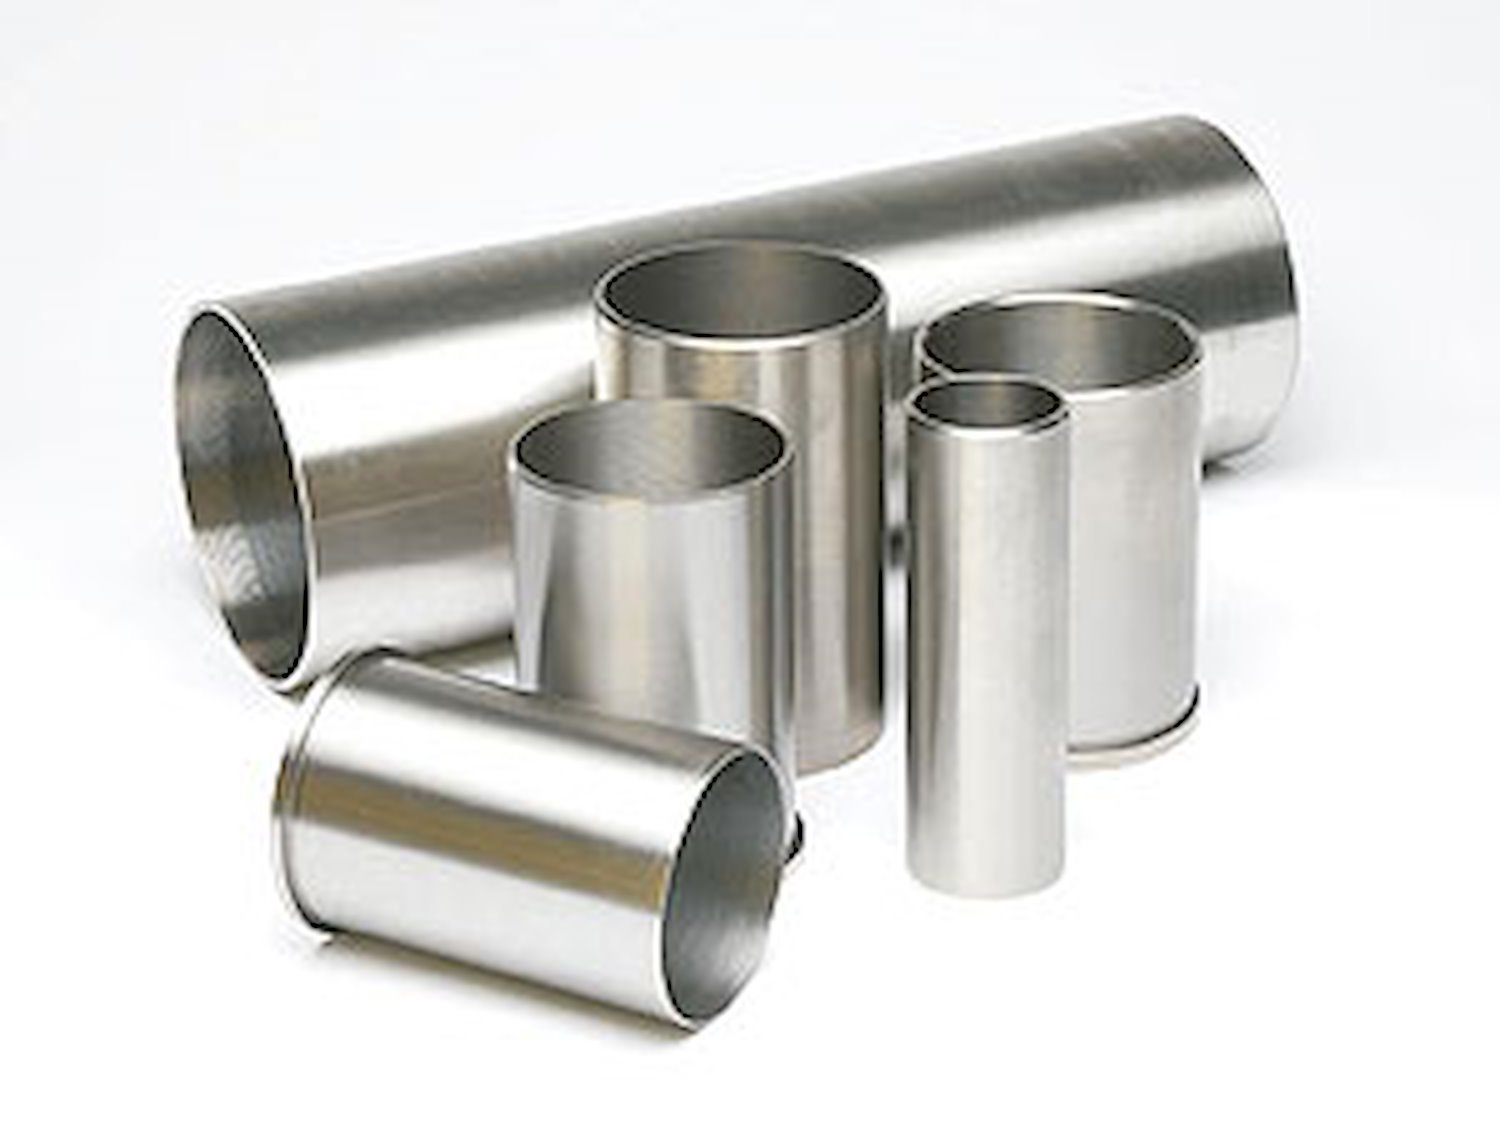 Cylinder Sleeve Bore: 2.5675" Length: 6-1/2" Wall Thickness: 1/8"